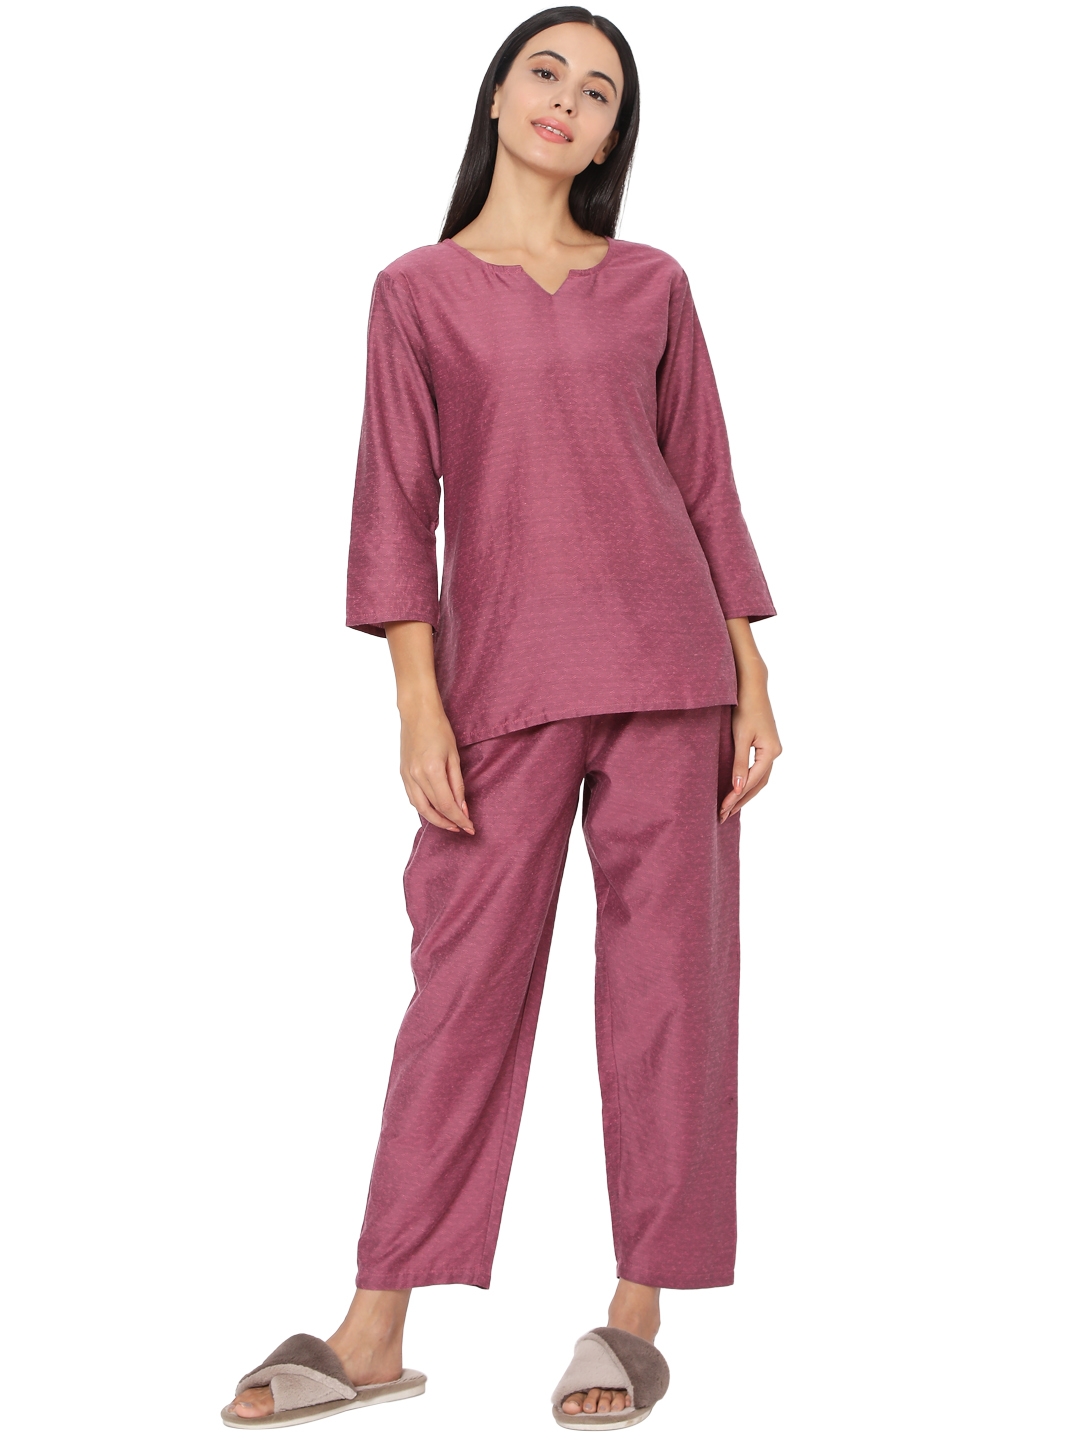 Smarty Pants | Smarty Pants Women's Cotton Ruby Pink Color Self Textured Night Suit